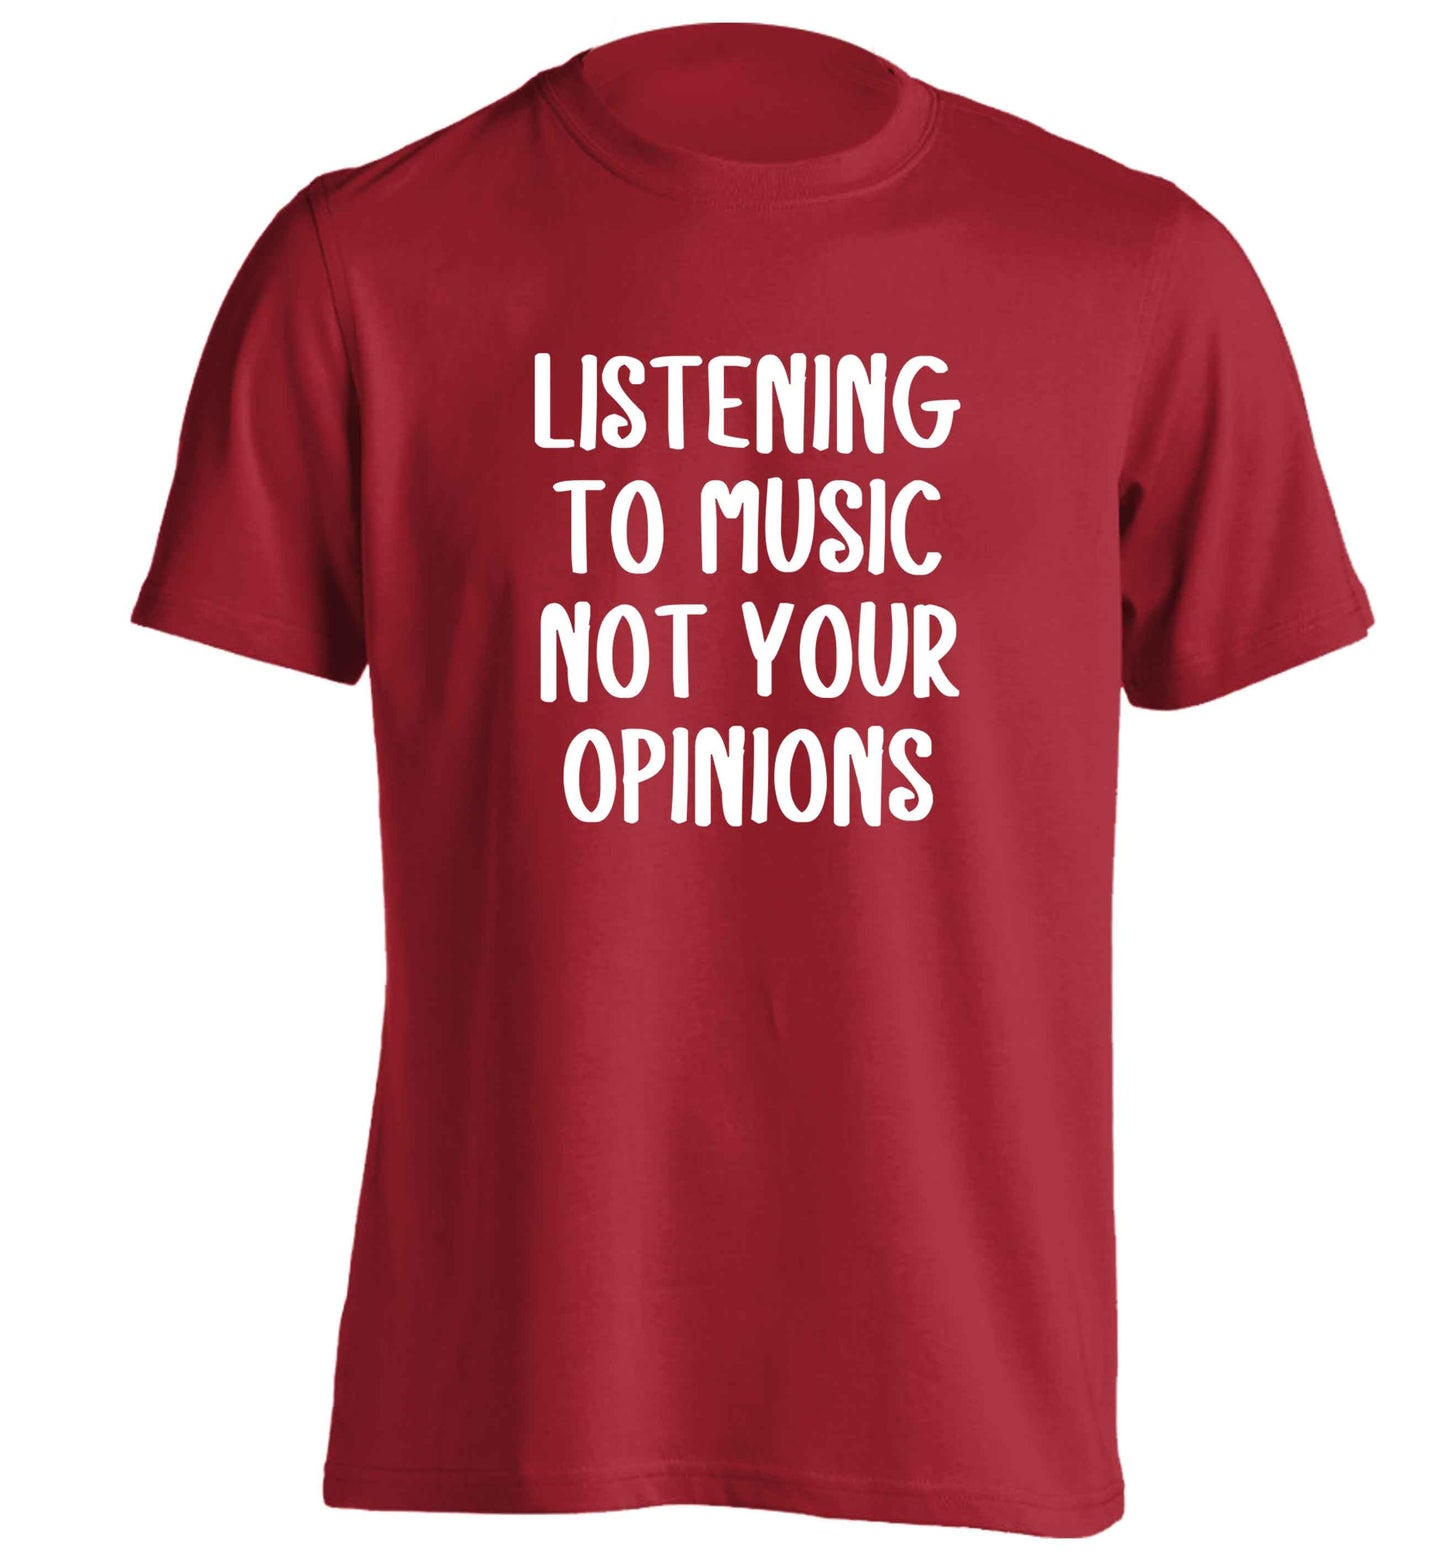 Listening to music not your opinions adults unisex red Tshirt 2XL